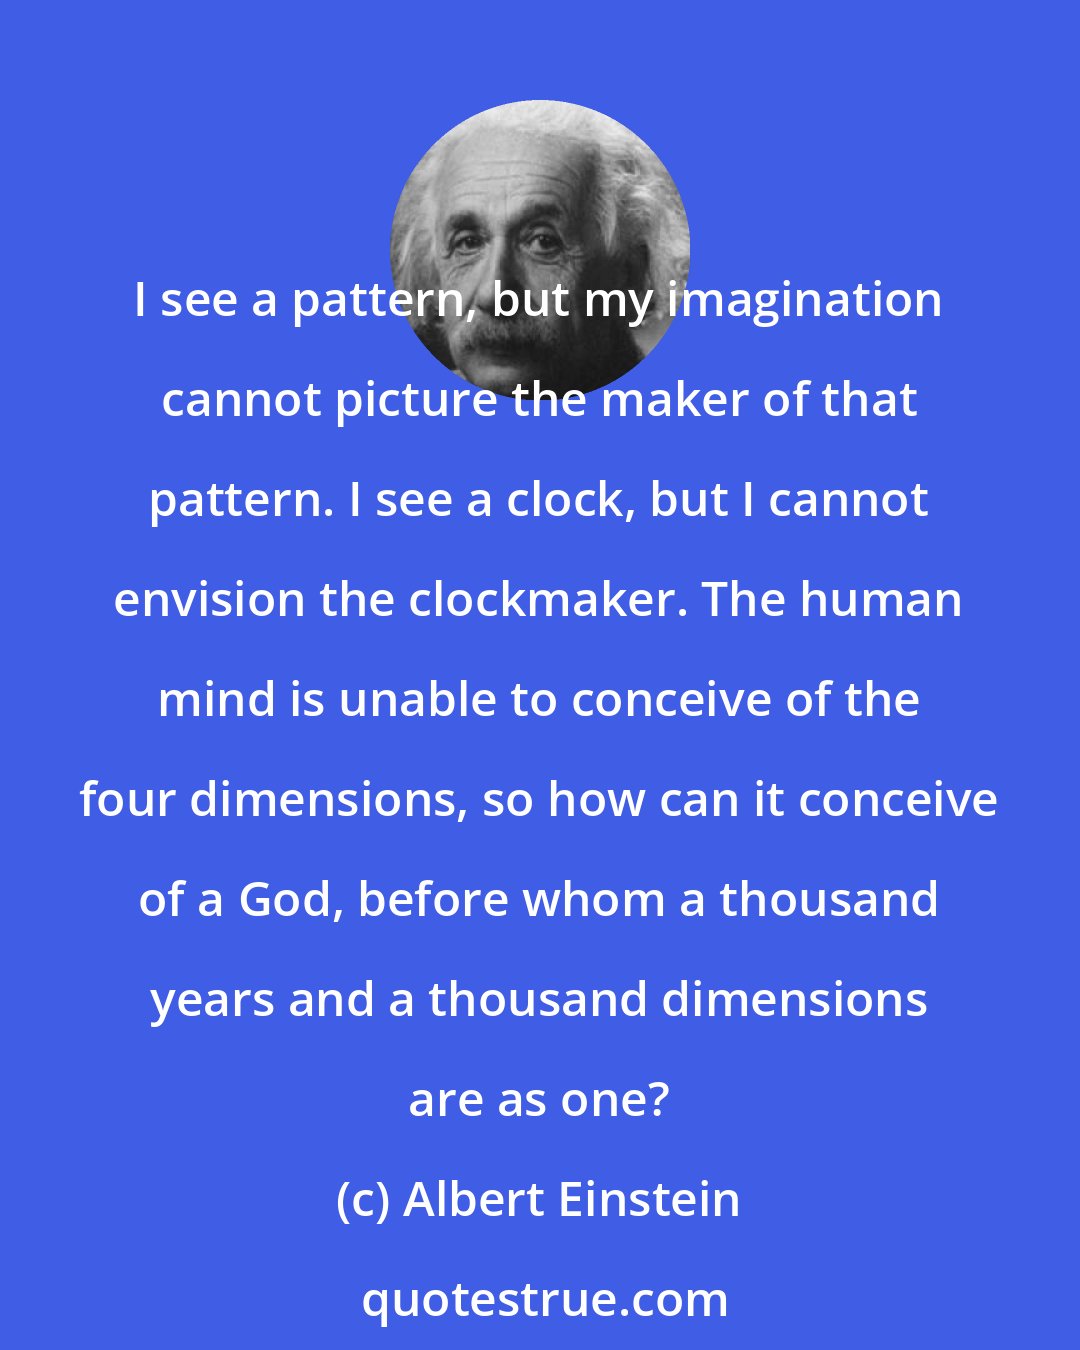 Albert Einstein: I see a pattern, but my imagination cannot picture the maker of that pattern. I see a clock, but I cannot envision the clockmaker. The human mind is unable to conceive of the four dimensions, so how can it conceive of a God, before whom a thousand years and a thousand dimensions are as one?